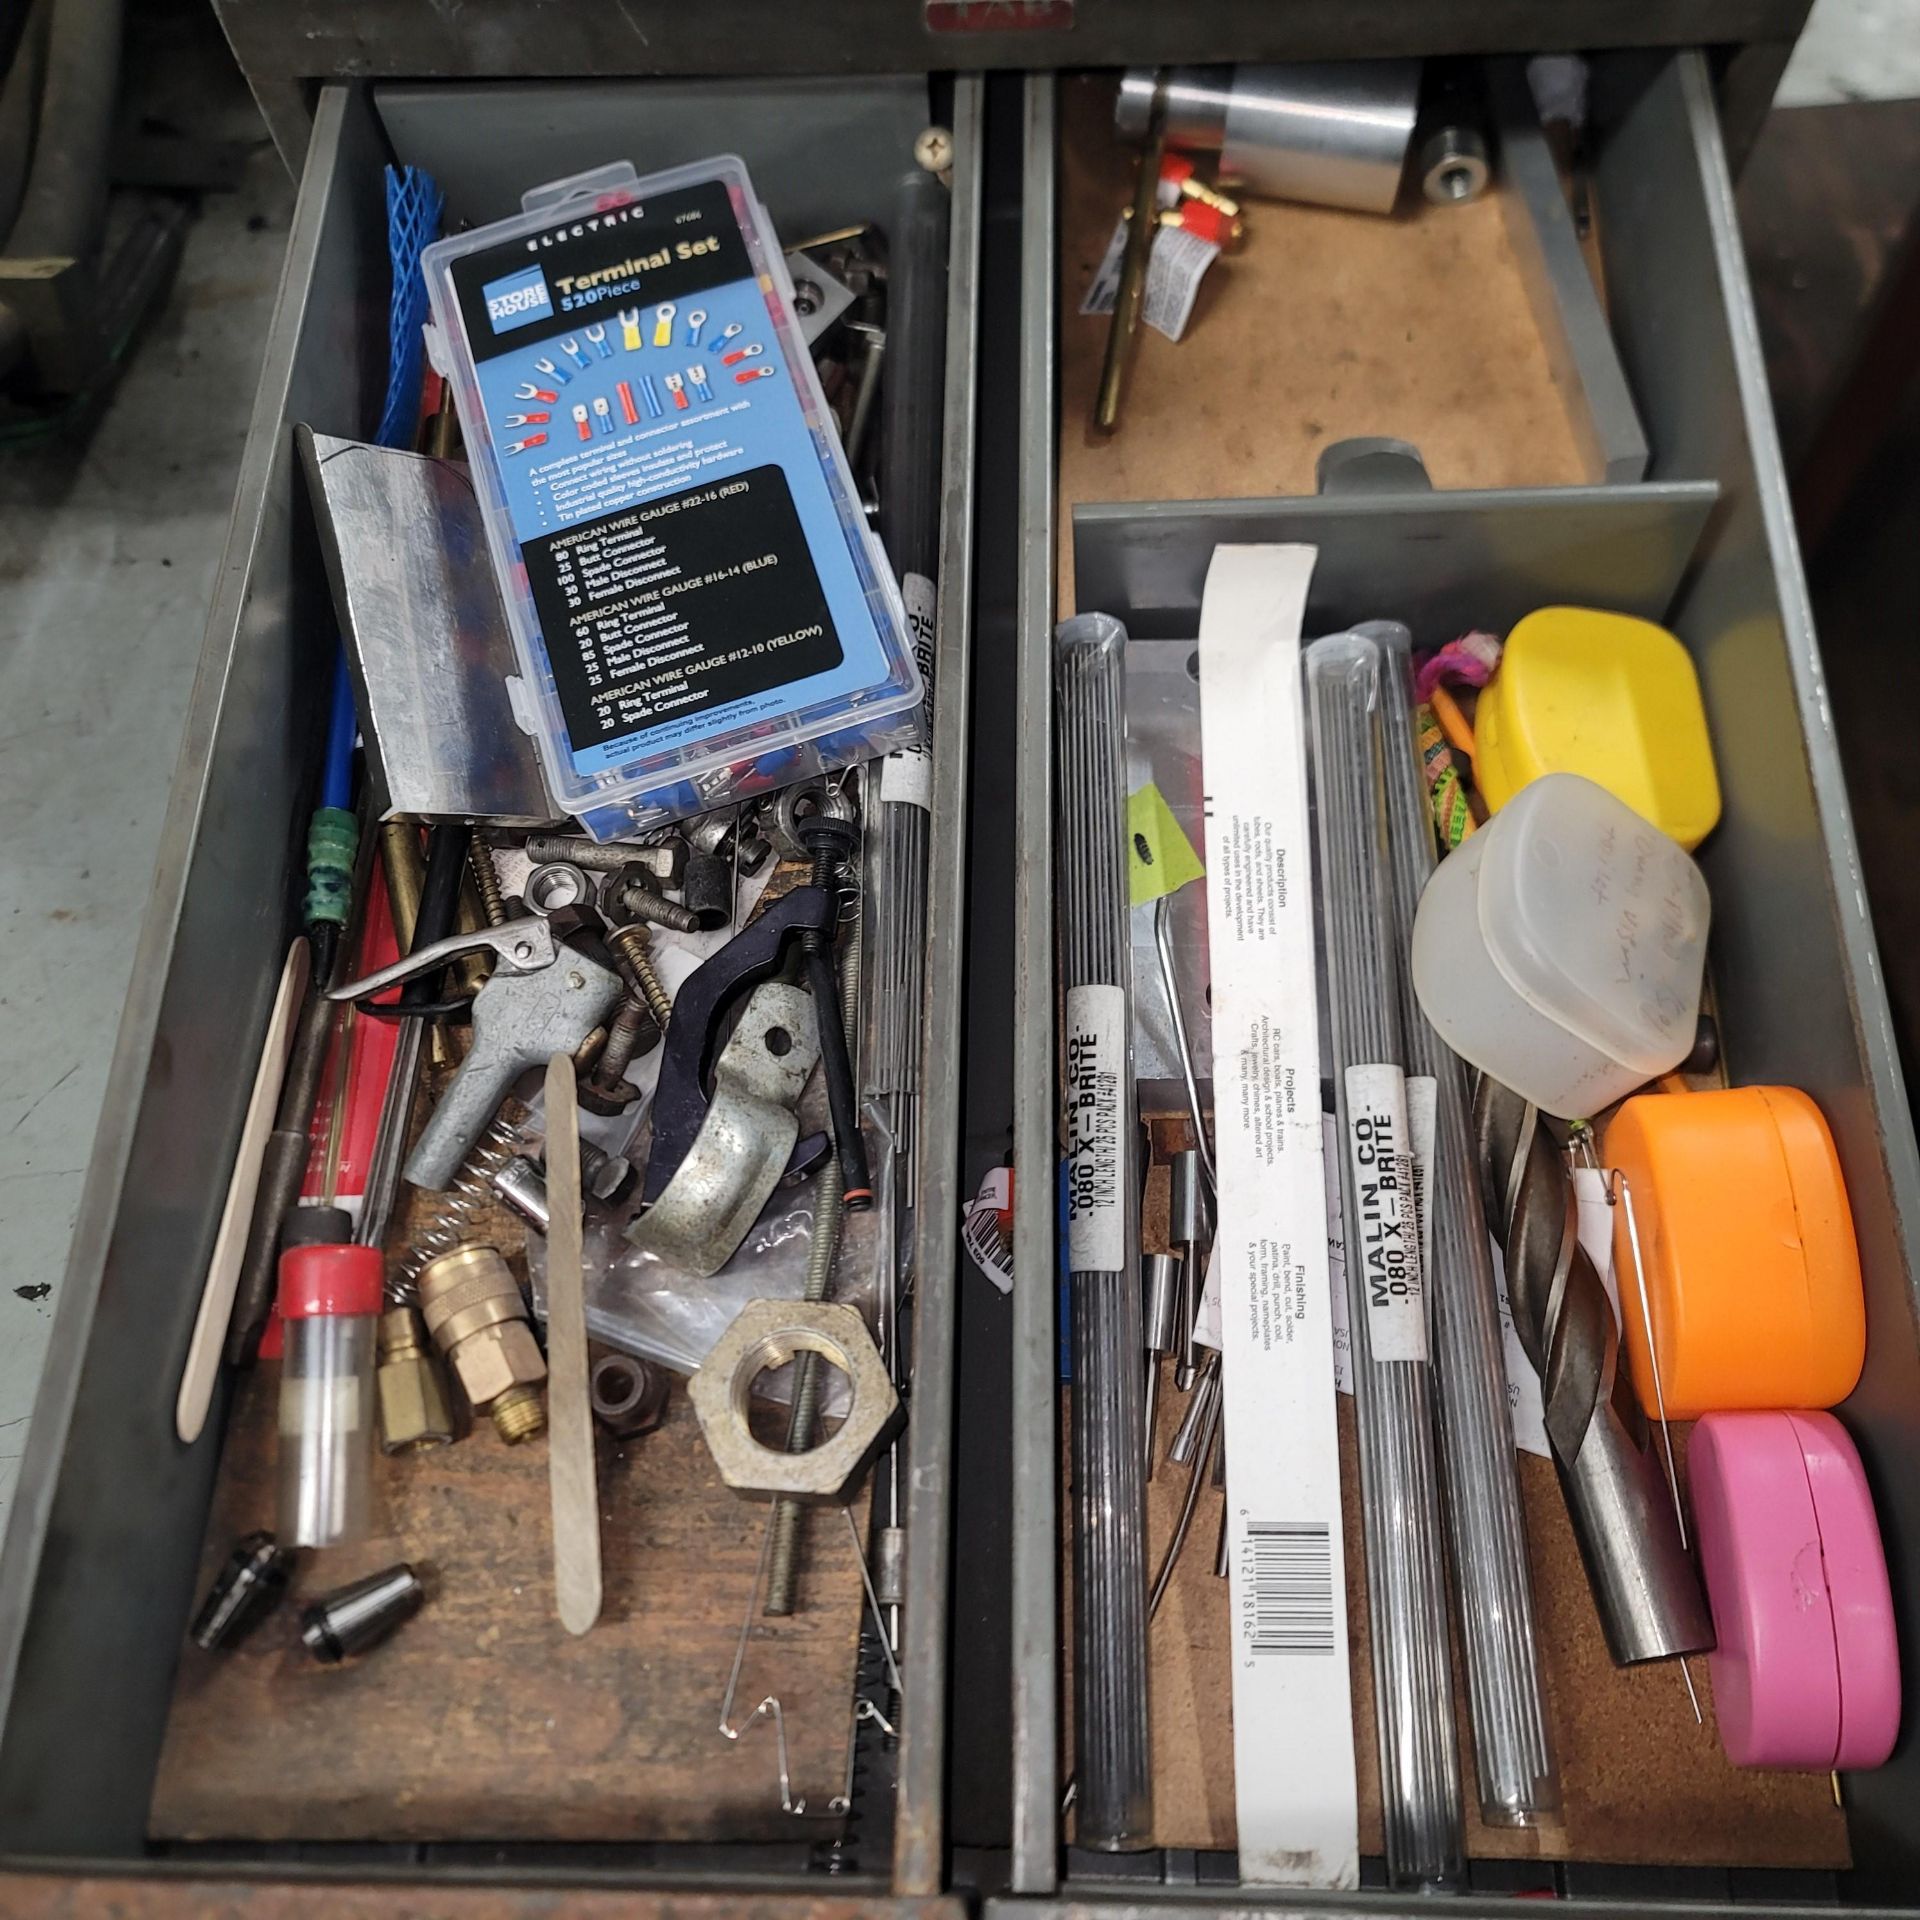 12-DRAWER STEEL CABINET, W/ CONTENTS: FULL OF TOOLING: REAMERS, TAPS, DRILLS, LATHE AND MILL - Image 7 of 7